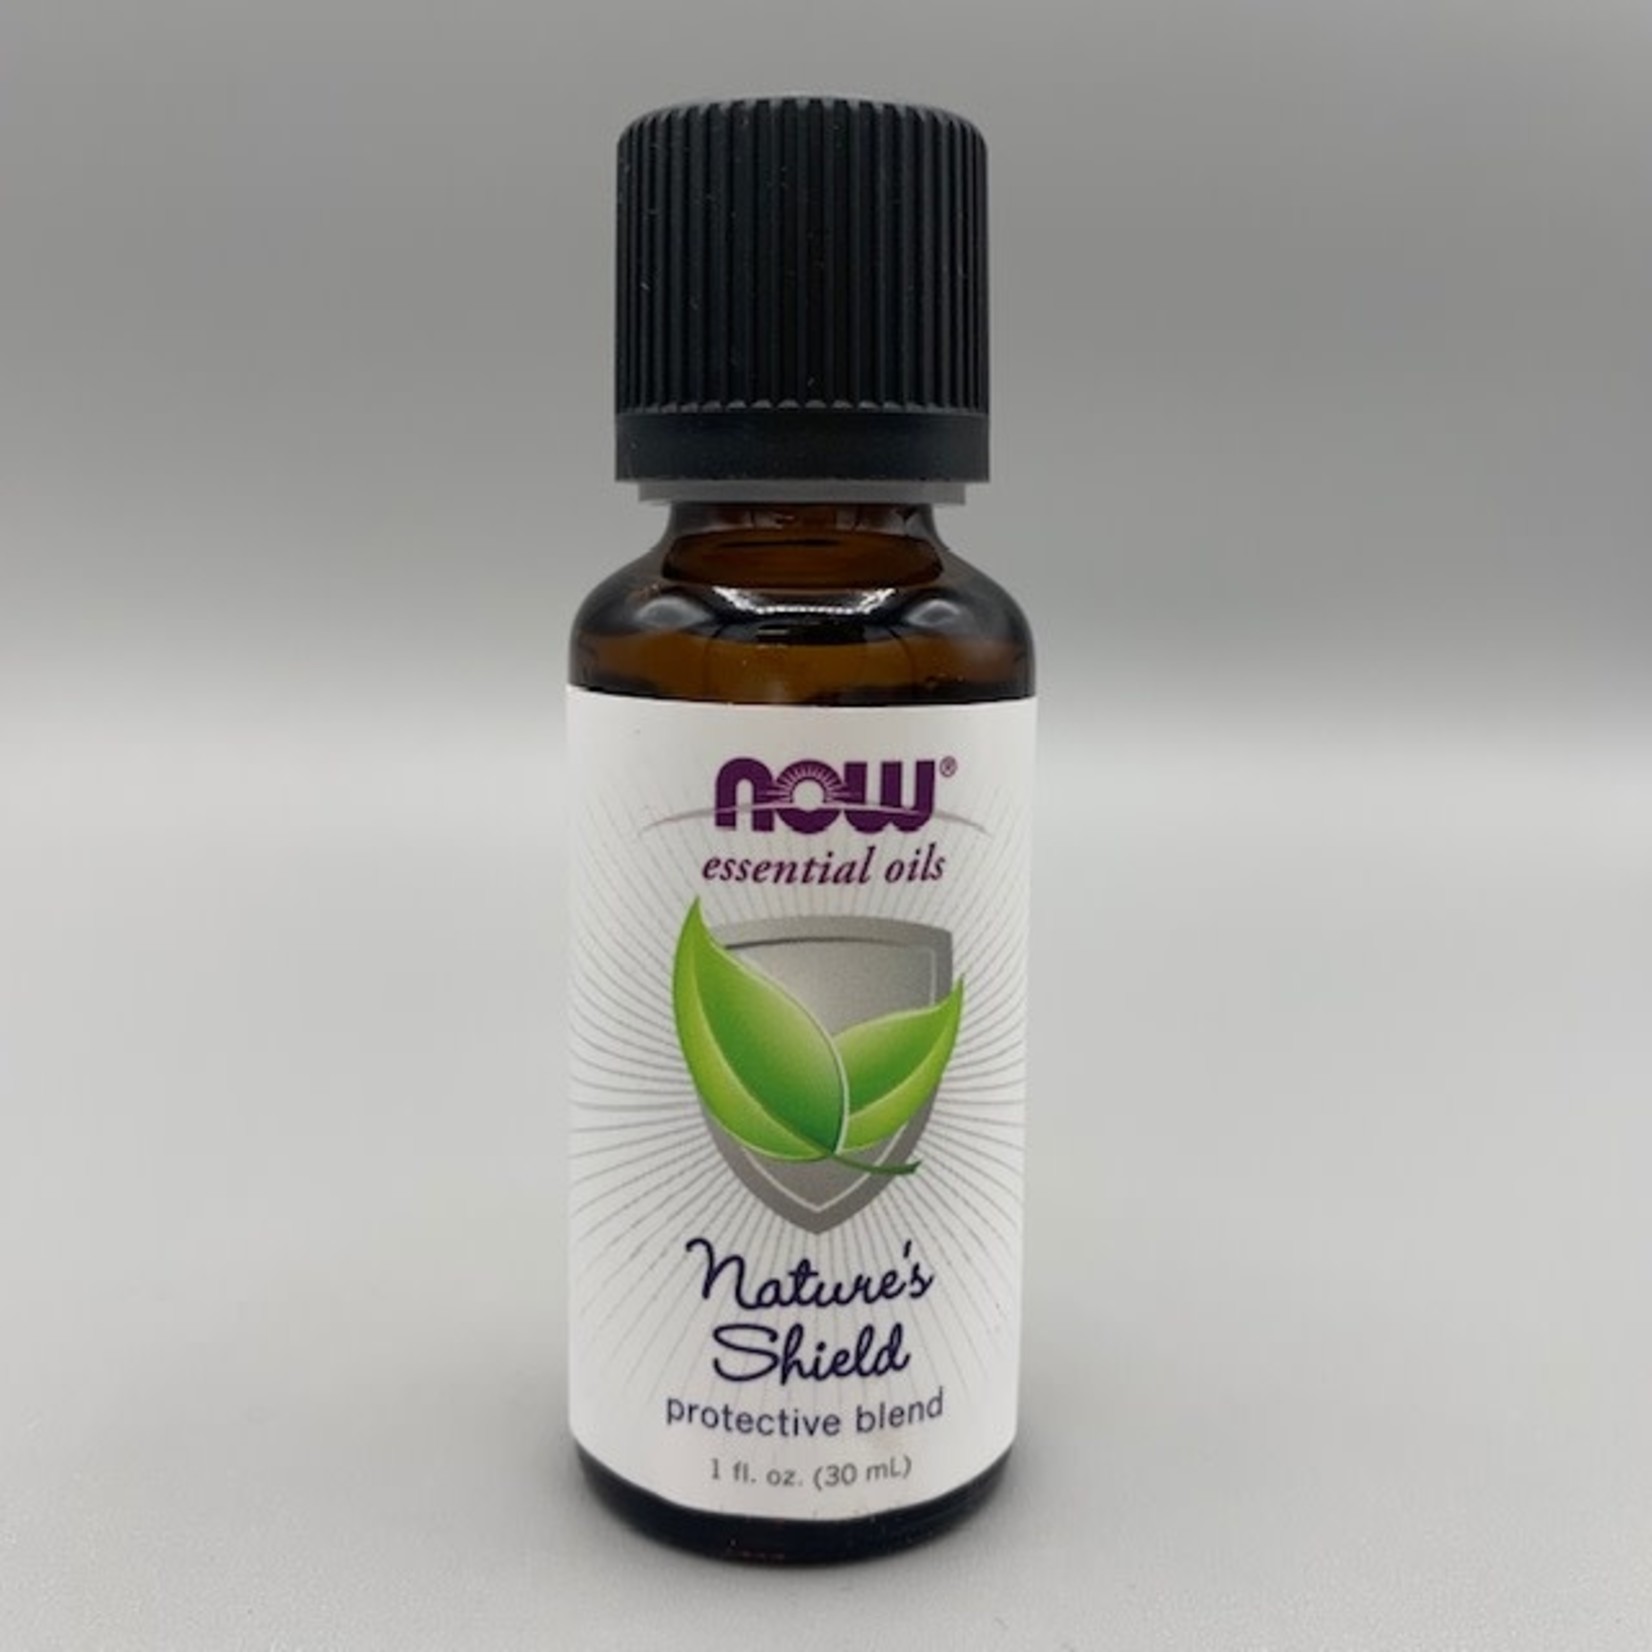 NOW Essential Oil Blend, 1 oz: Nature’s Shield